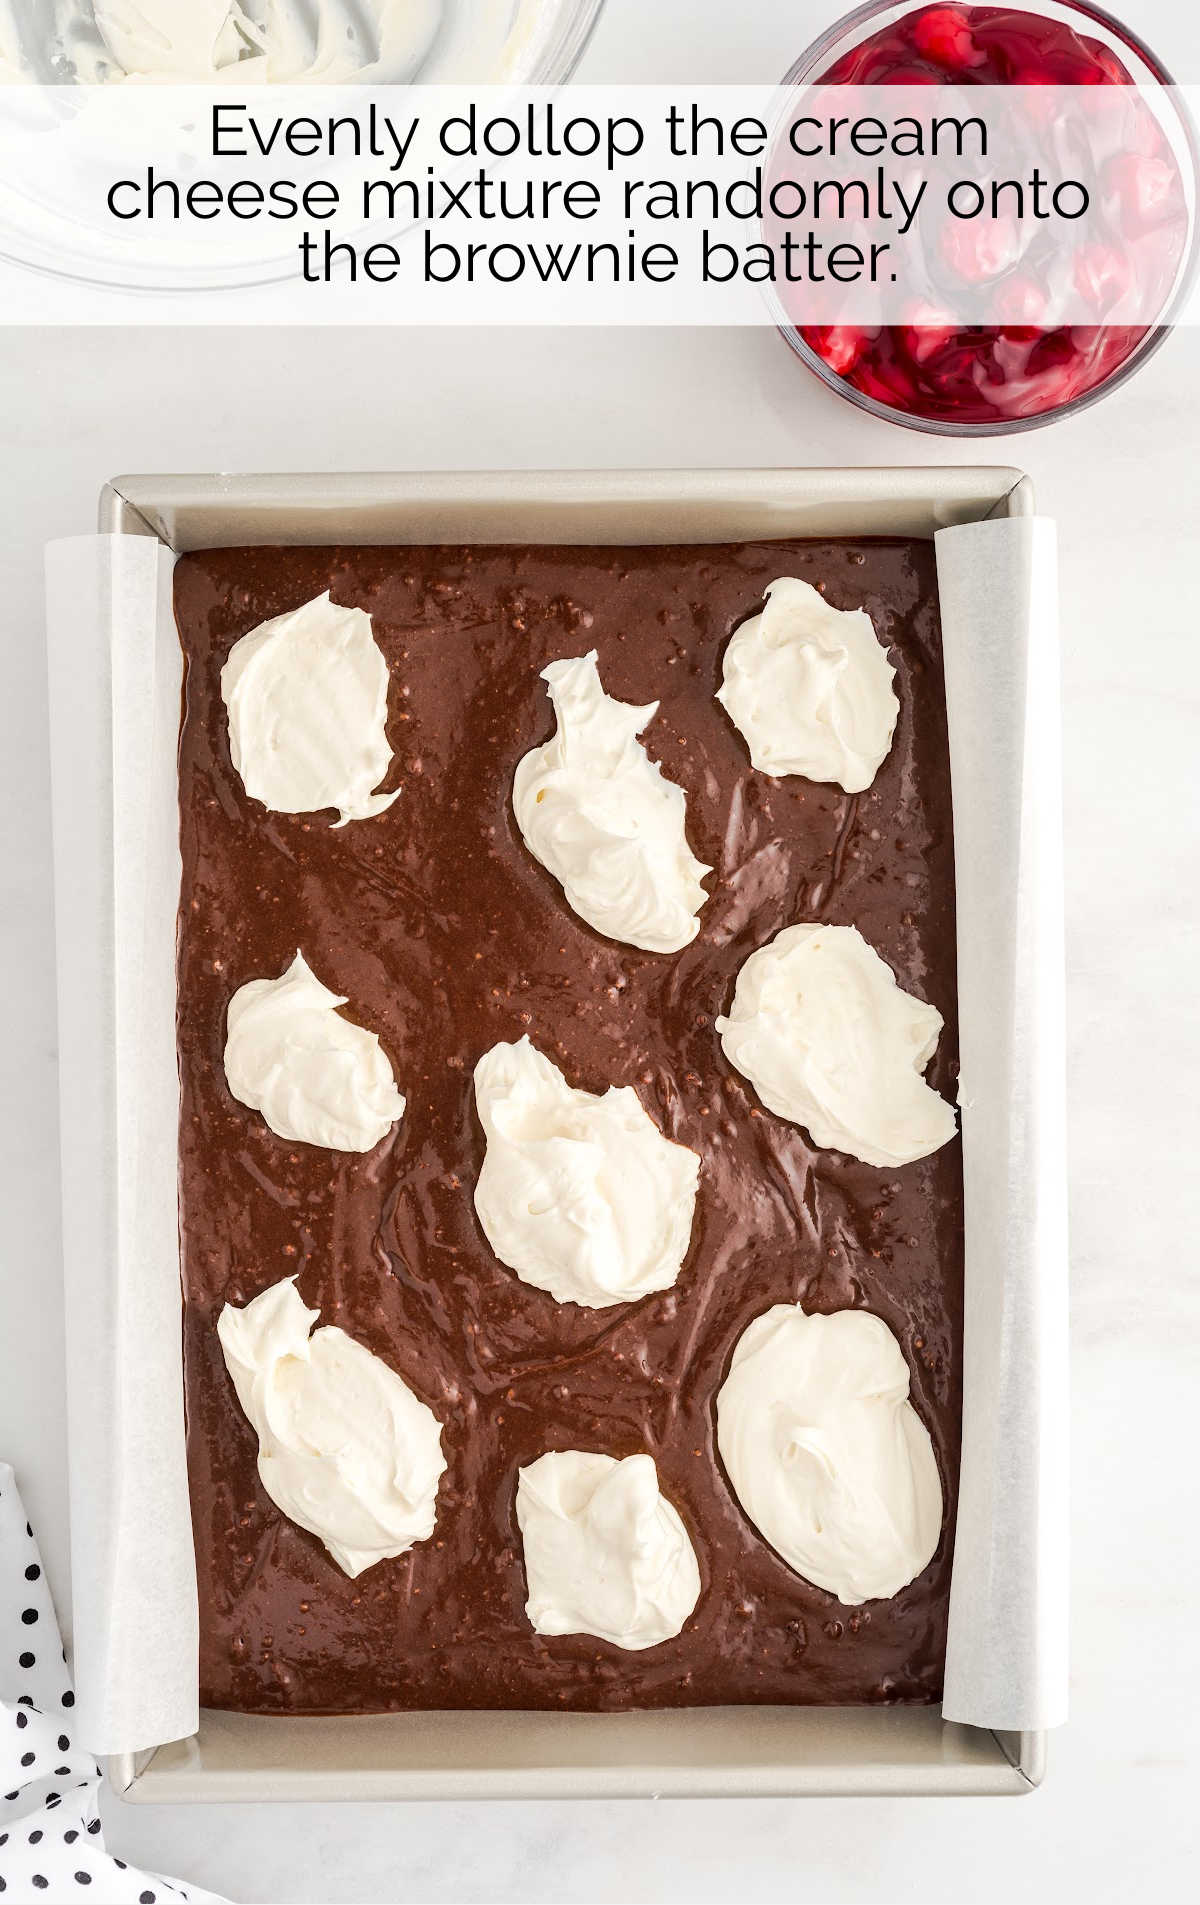 drops of cream cheese mixture placed on top of the brownie batter in a baking pan